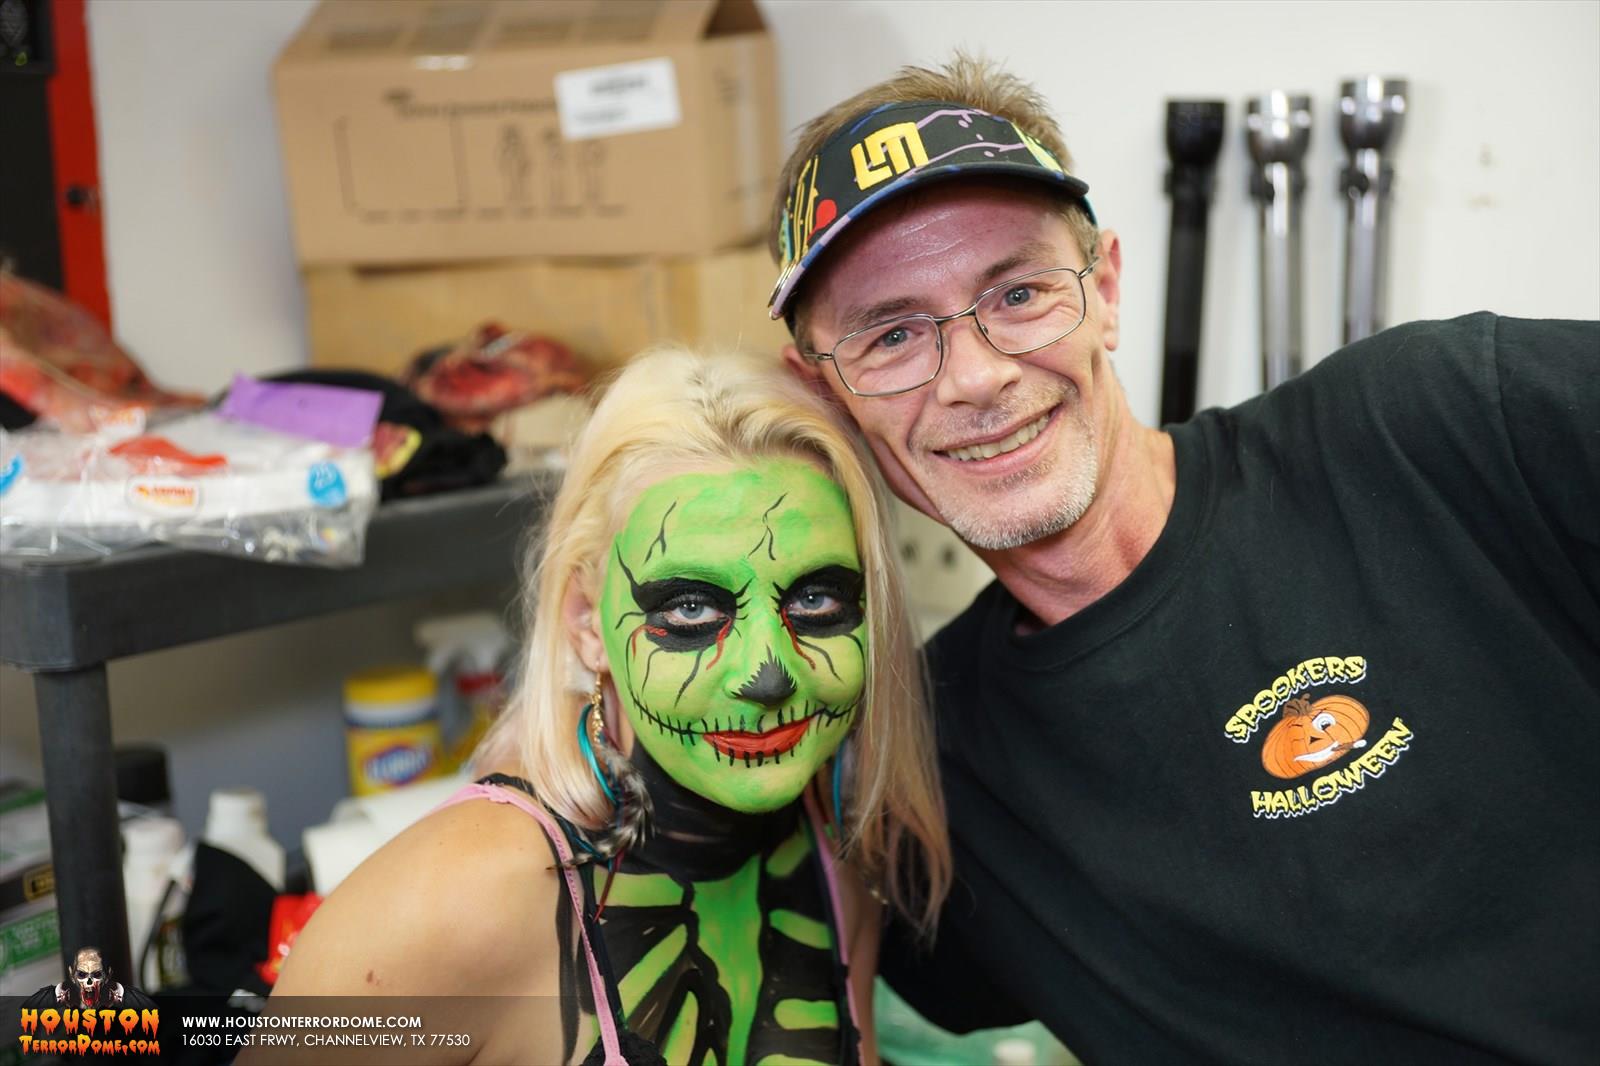 Female Zombie posses with Makeup Artist Cory